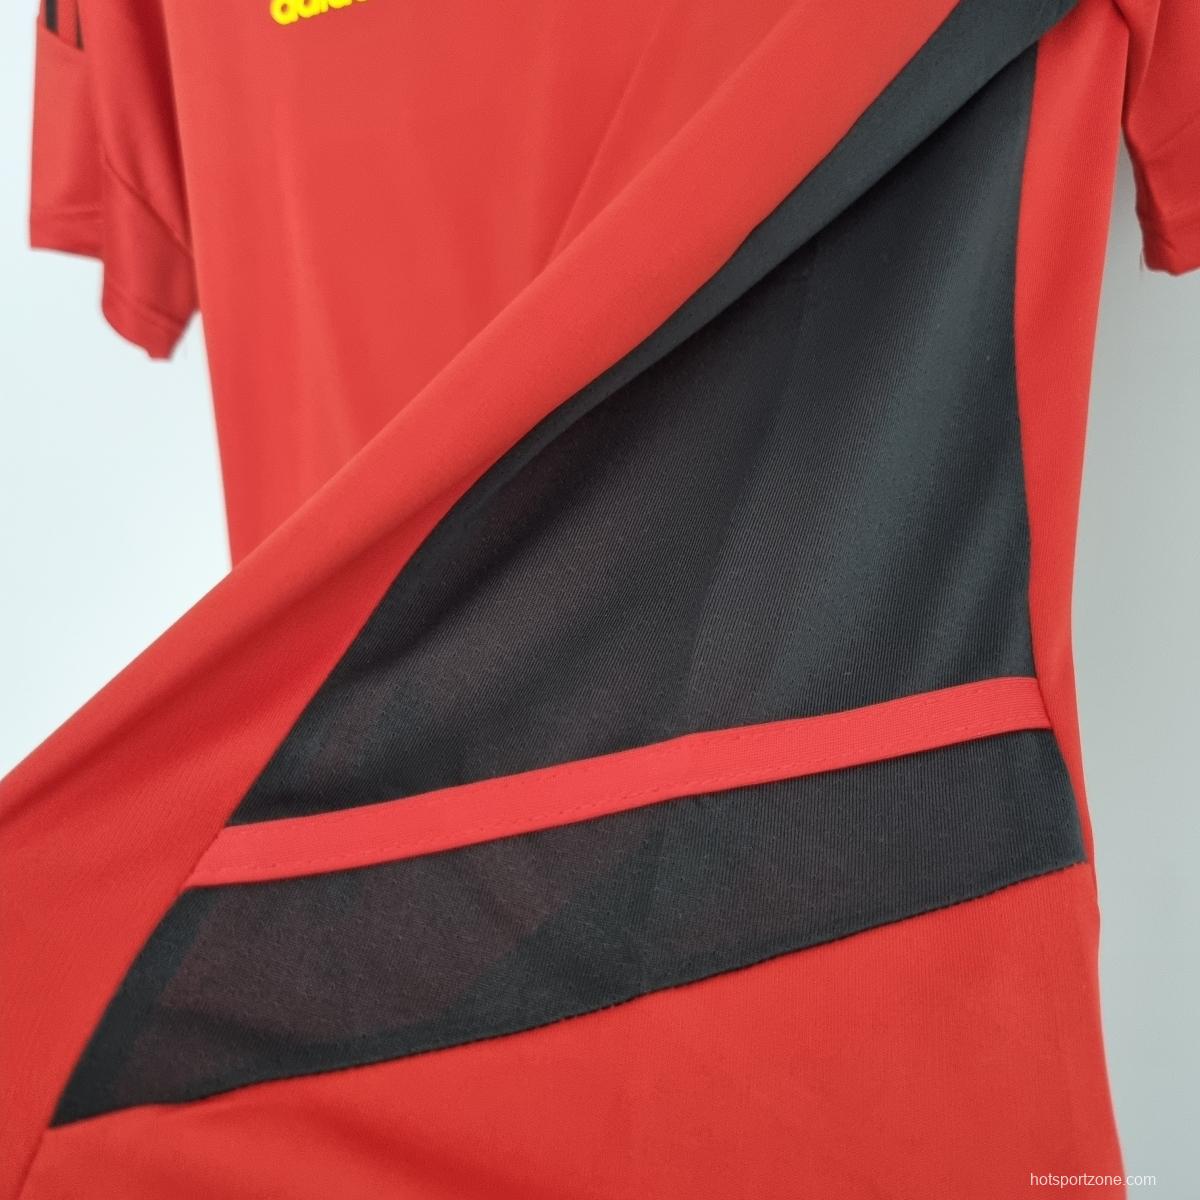 22/23 Flamengo Training Suit Red Soccer Jersey